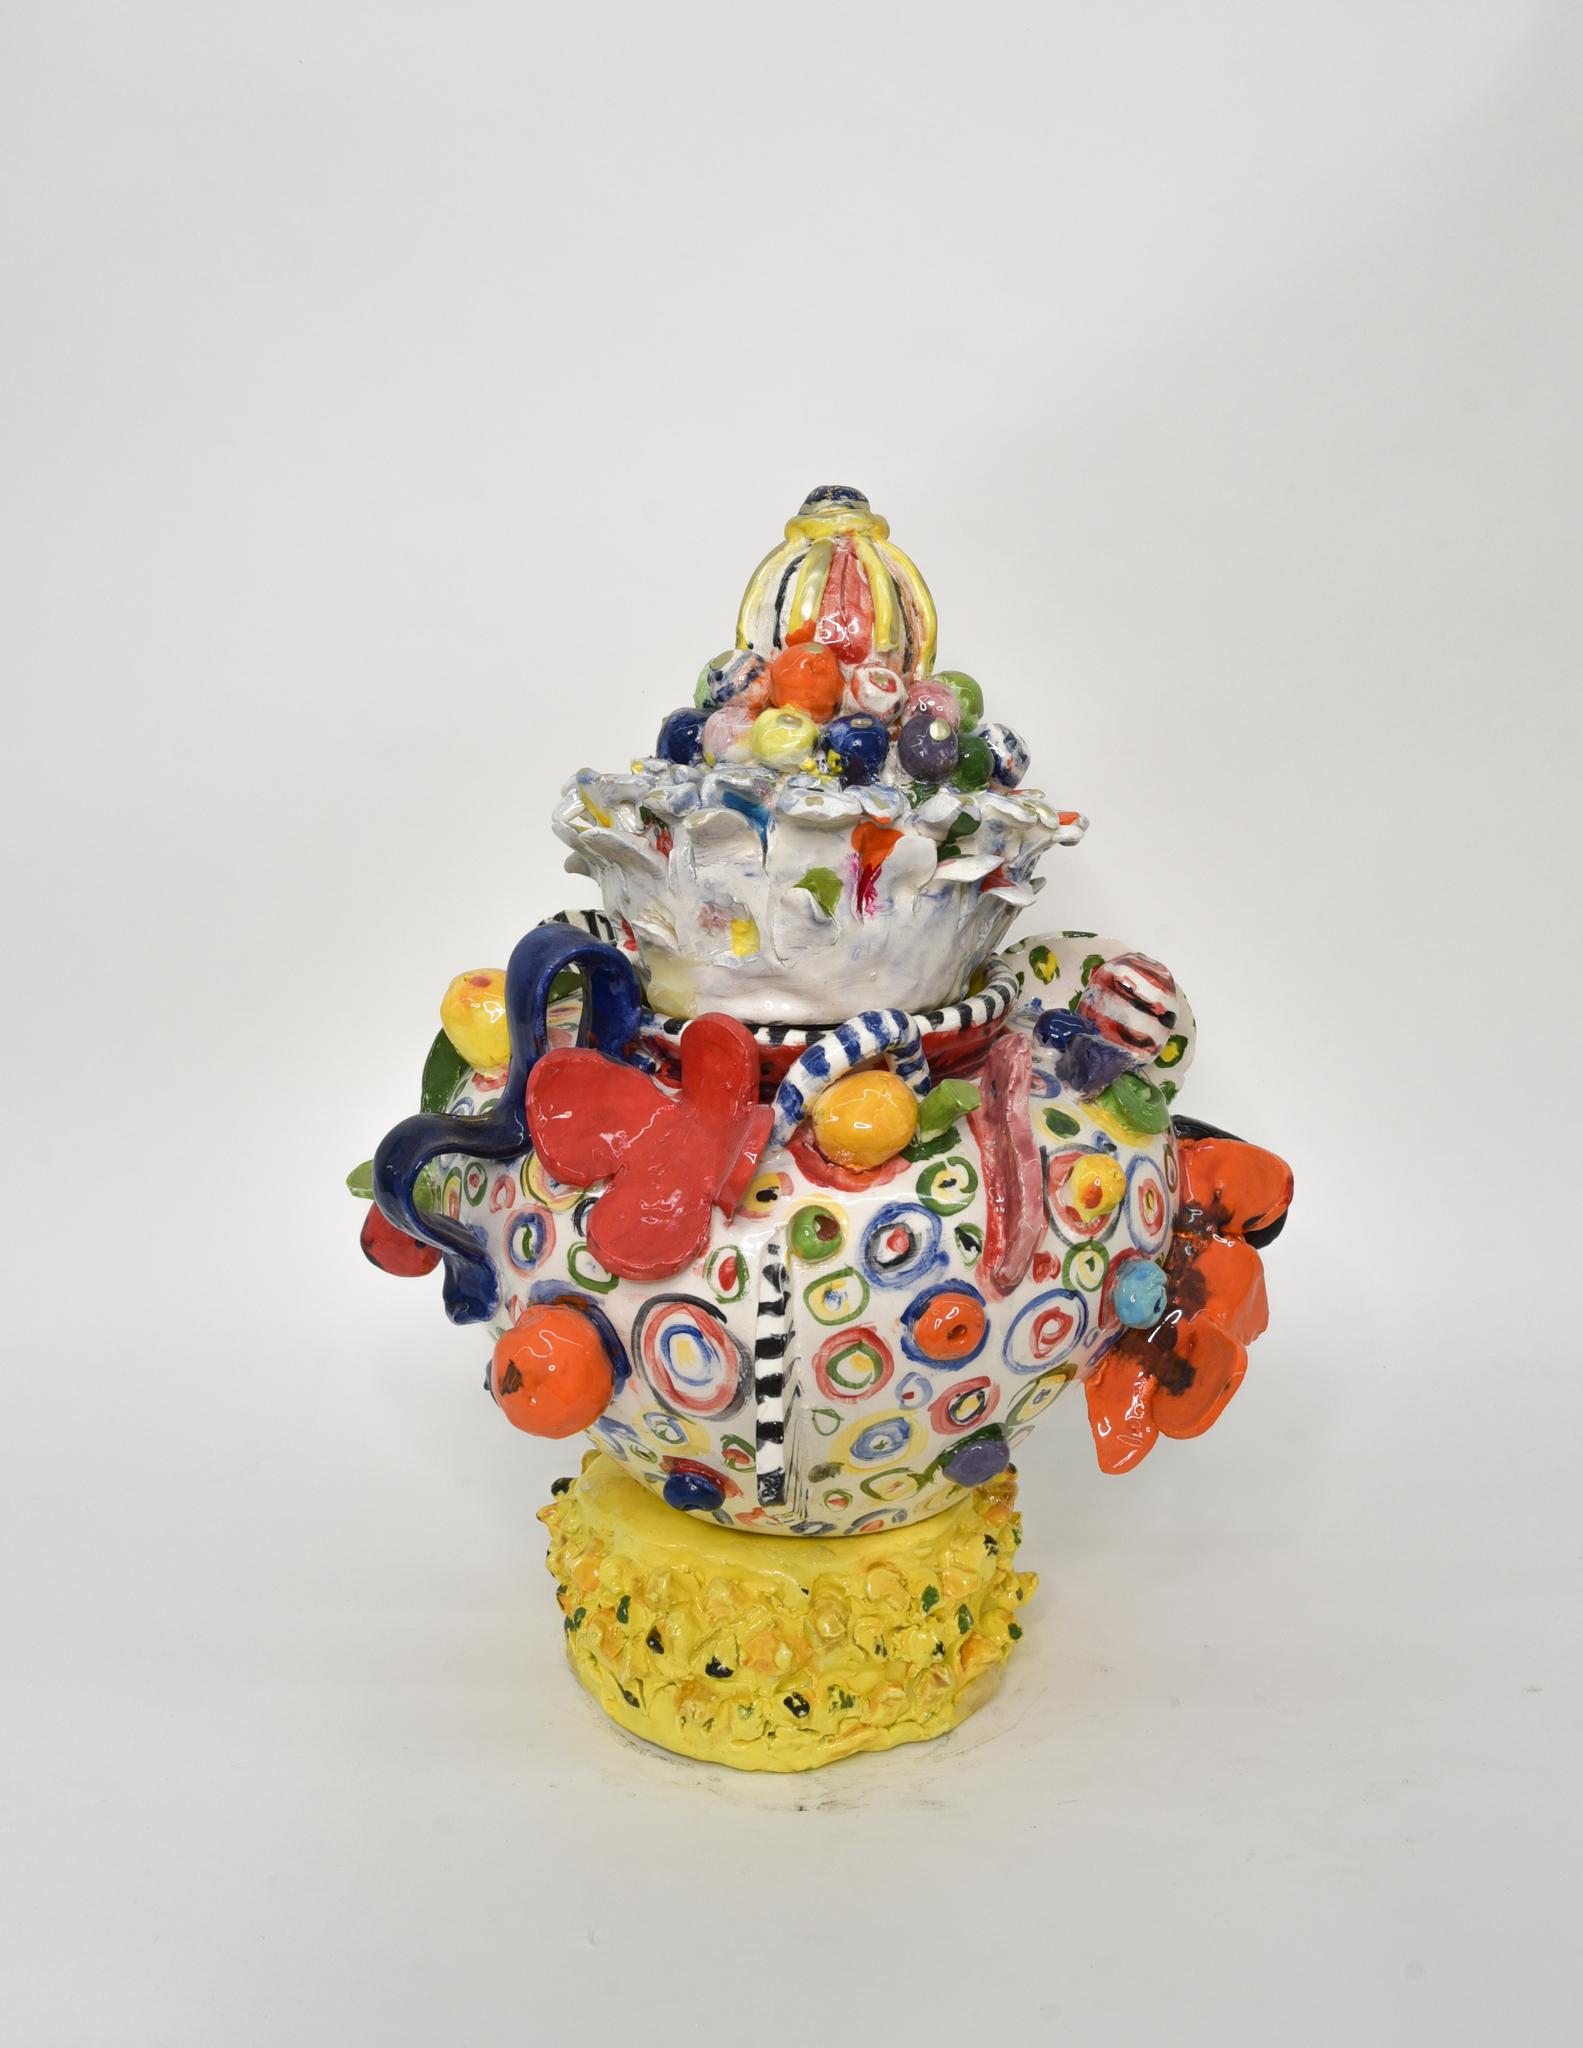 Untitled XV. Glazed ceramic abstract jar sculpture - Sculpture by Charo Oquet